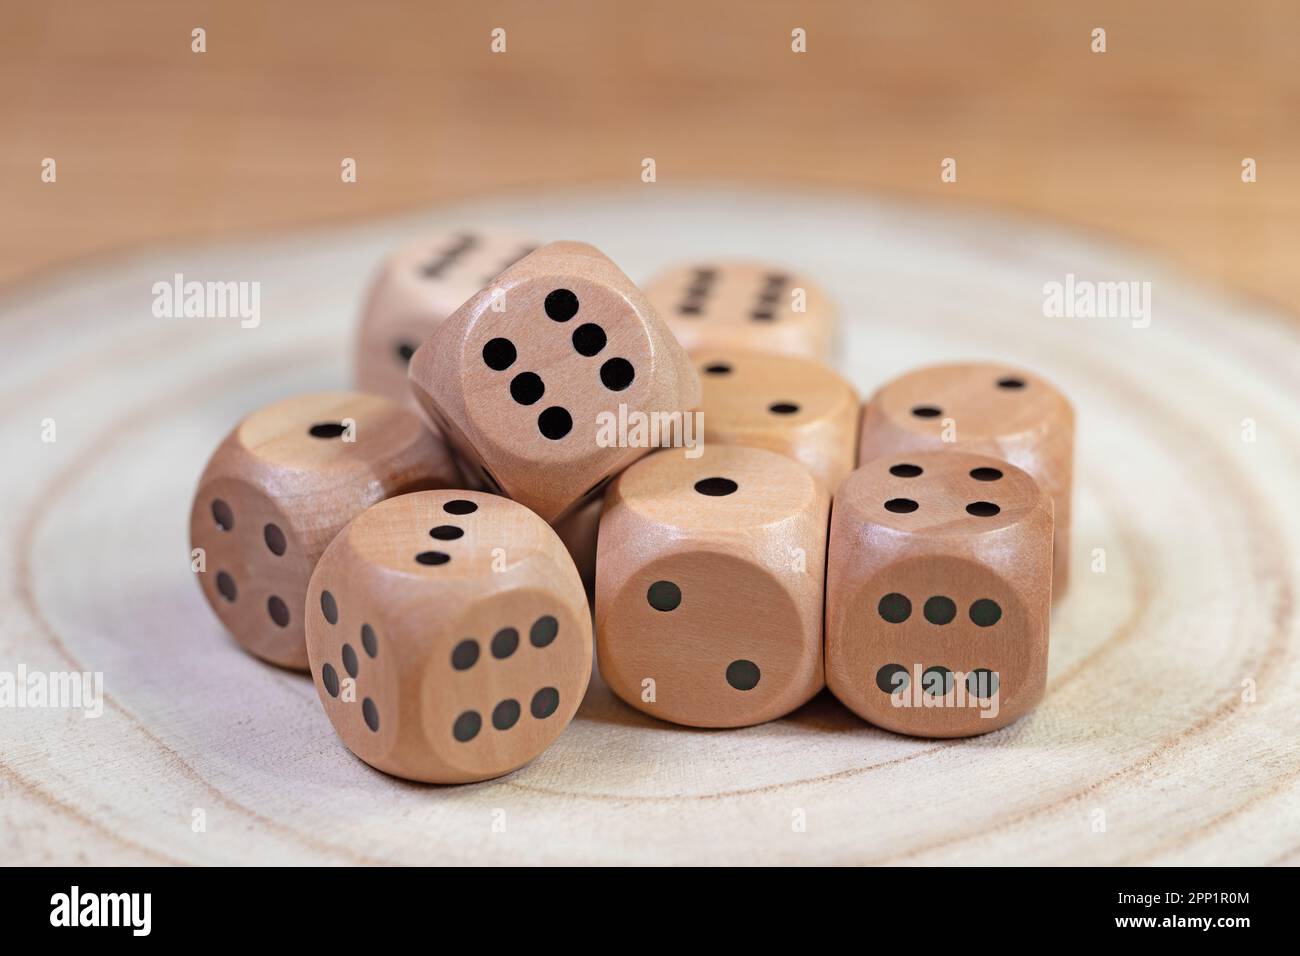 Many game cubes made of wood Stock Photo